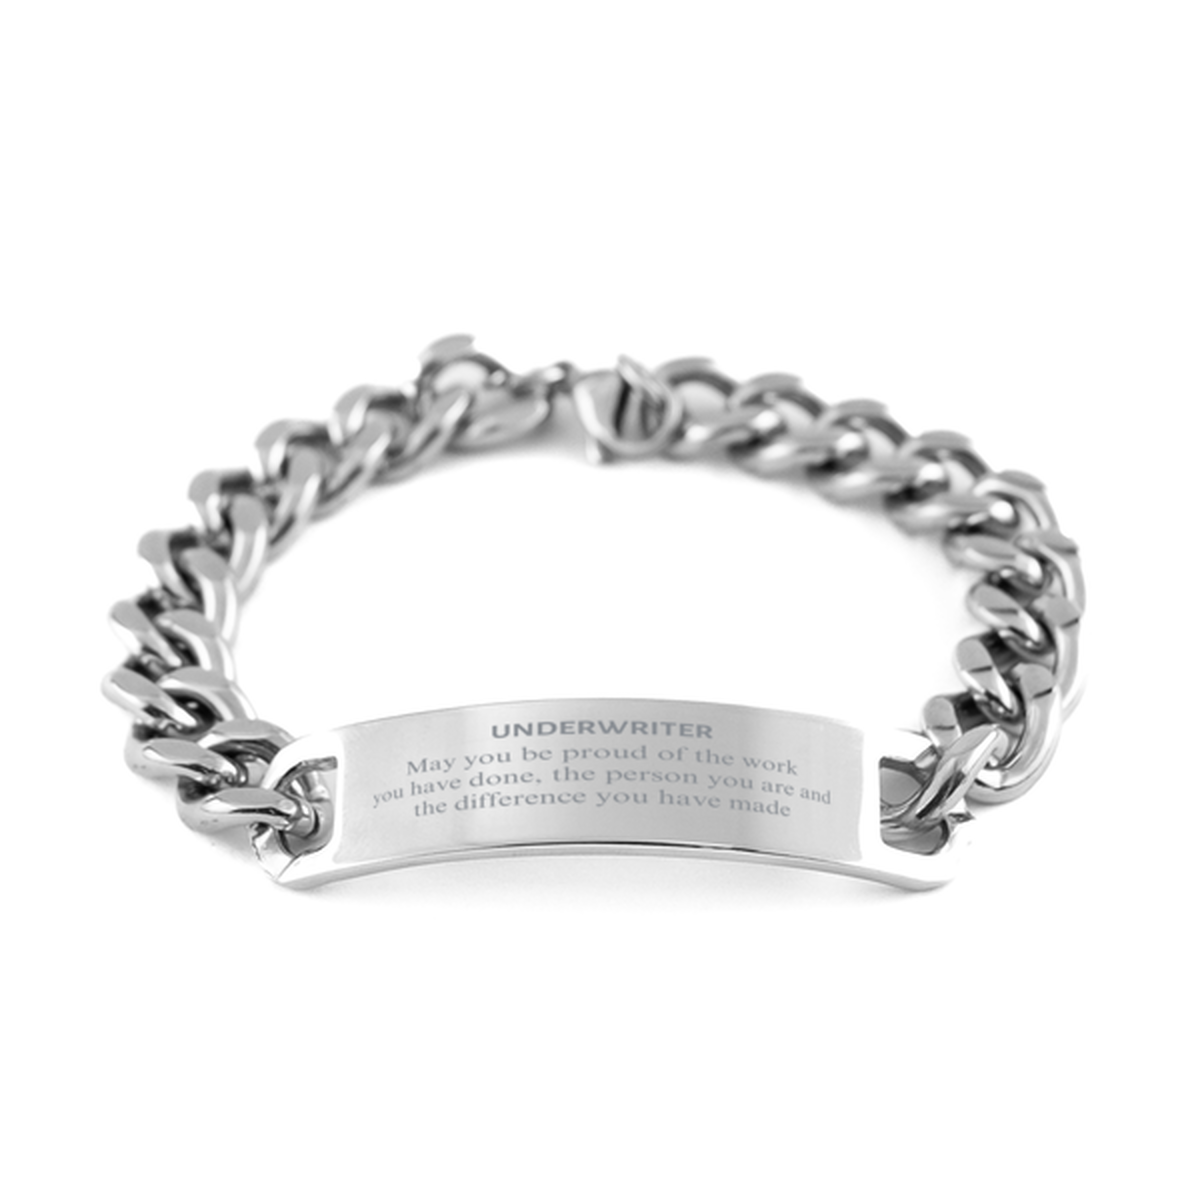 Underwriter May you be proud of the work you have done, Retirement Underwriter Cuban Chain Stainless Steel Bracelet for Colleague Appreciation Gifts Amazing for Underwriter